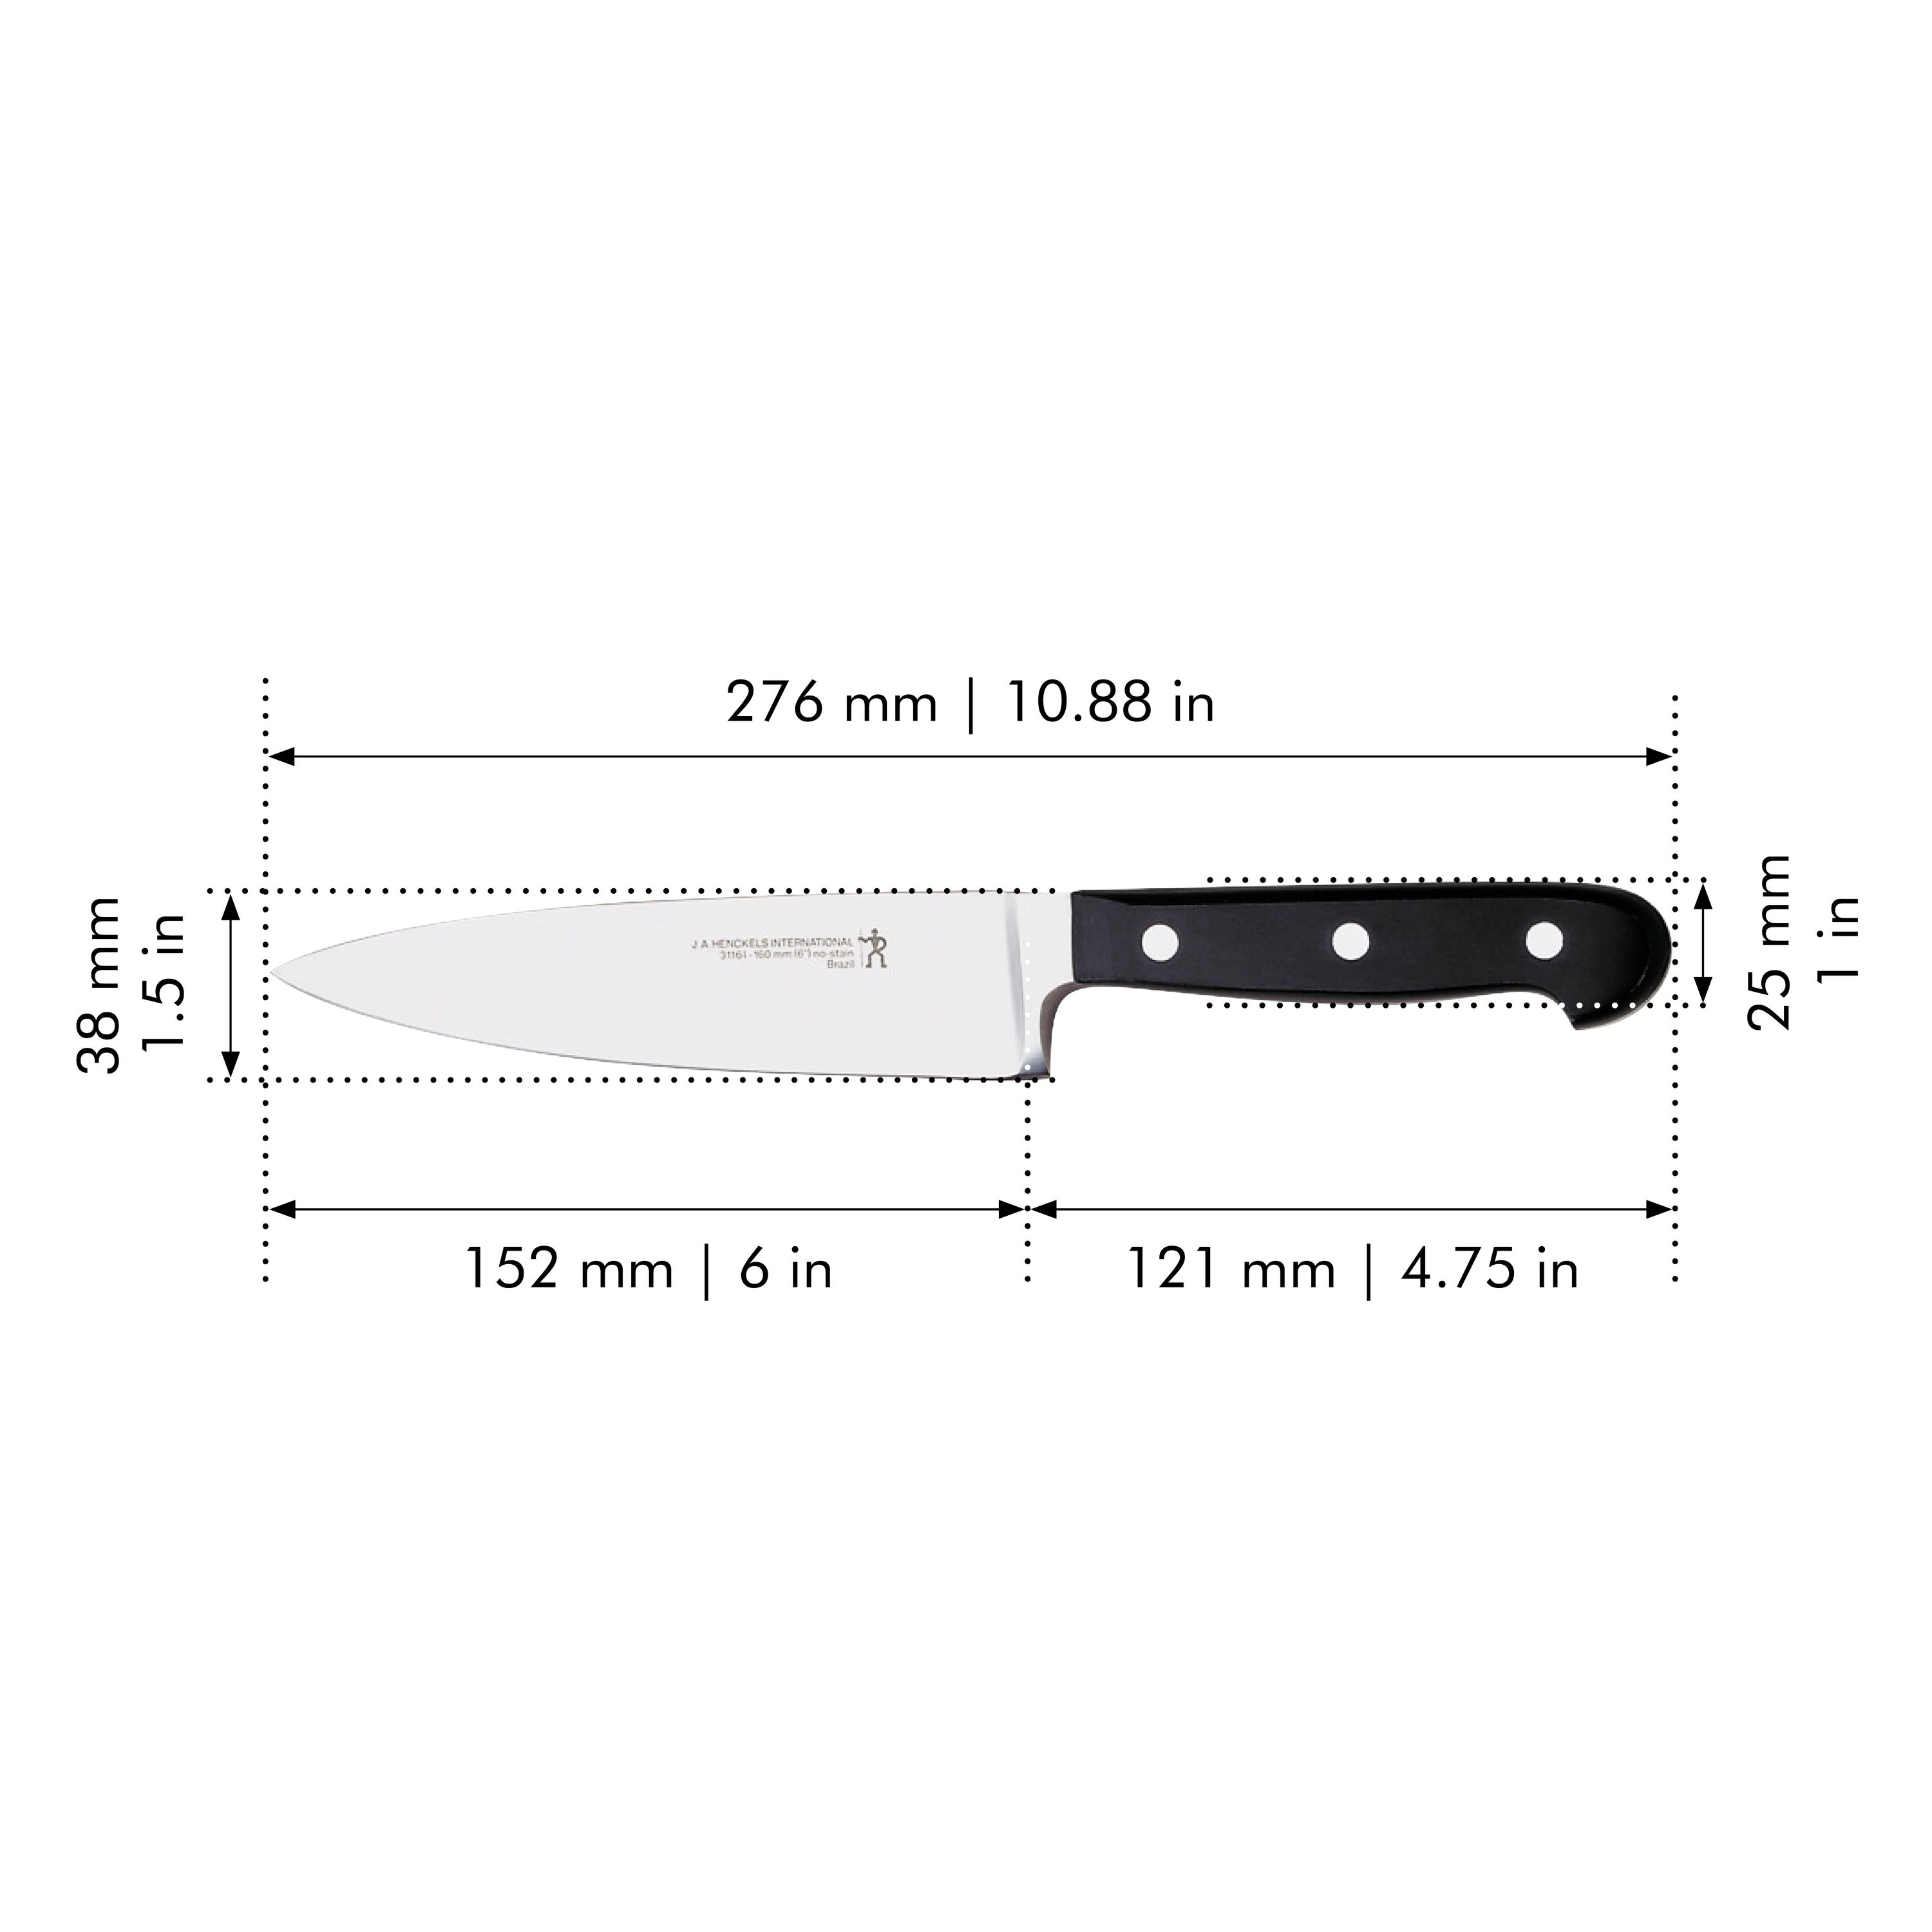 Small Chef Knife 6.00 Fixed Blade - Kitchen Cutlery